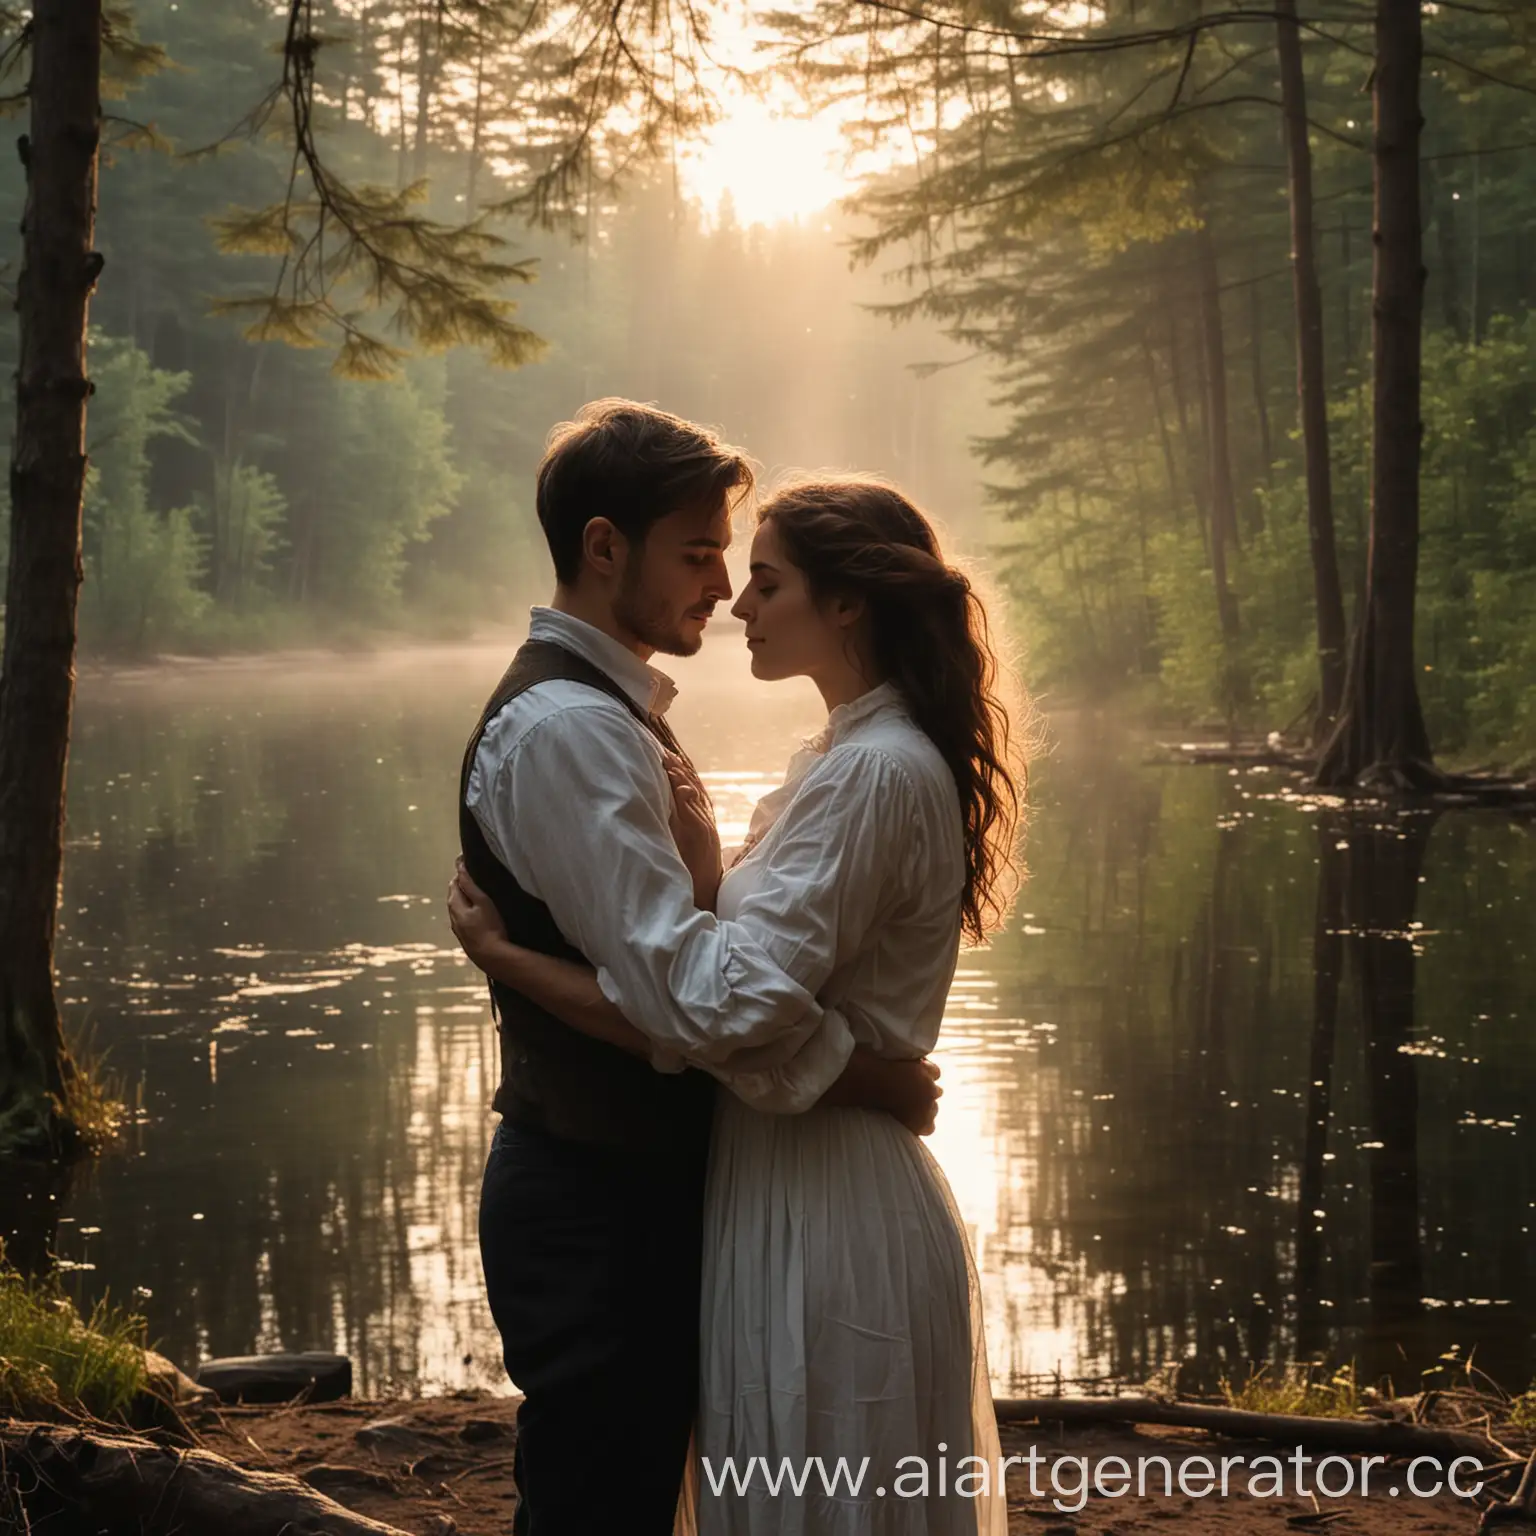 Romantic-Couple-Embracing-by-Forest-Lake-at-Dusk